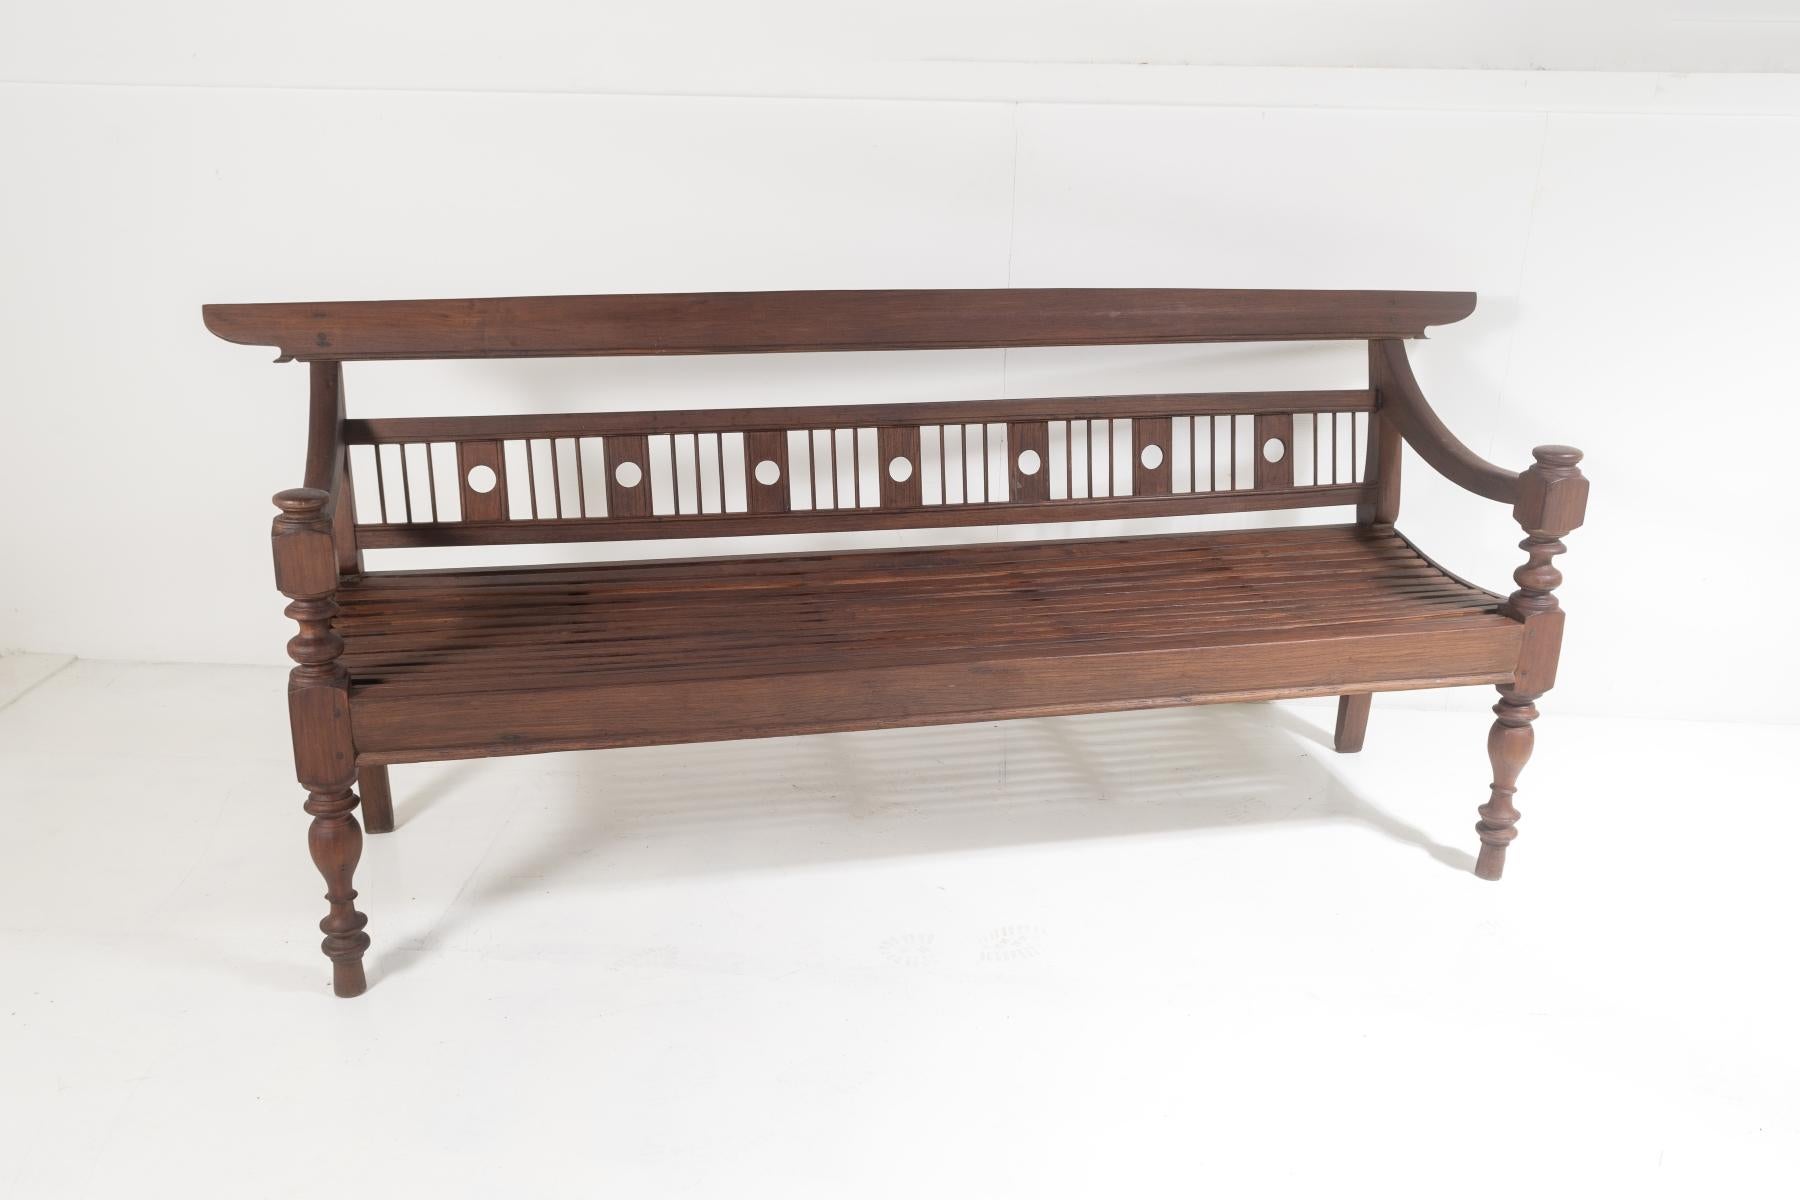 A genuine late 19th century Burmese teak bench from Myanmar (Burma).  A quality piece of craftmanship, with pegged joints and hand crafted throughout, an authentic piece of Myanmar furniture and a rare find in this condition.
A large 3-seater bench